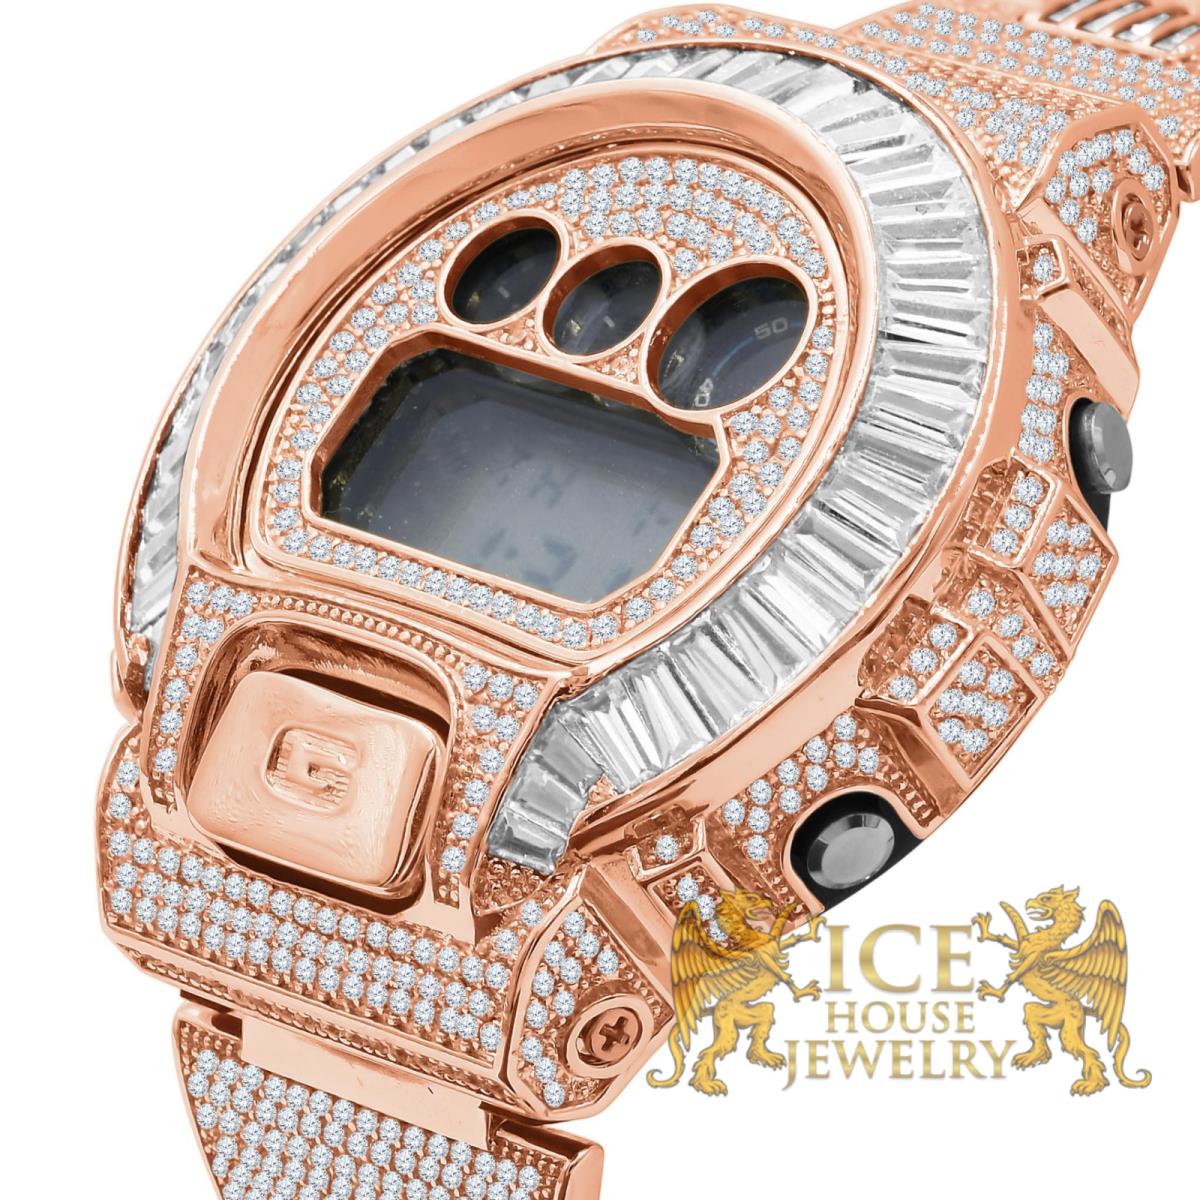 Icy White Baguettes On Rose Gold Finish Casio G-shock DW-6900 Watch